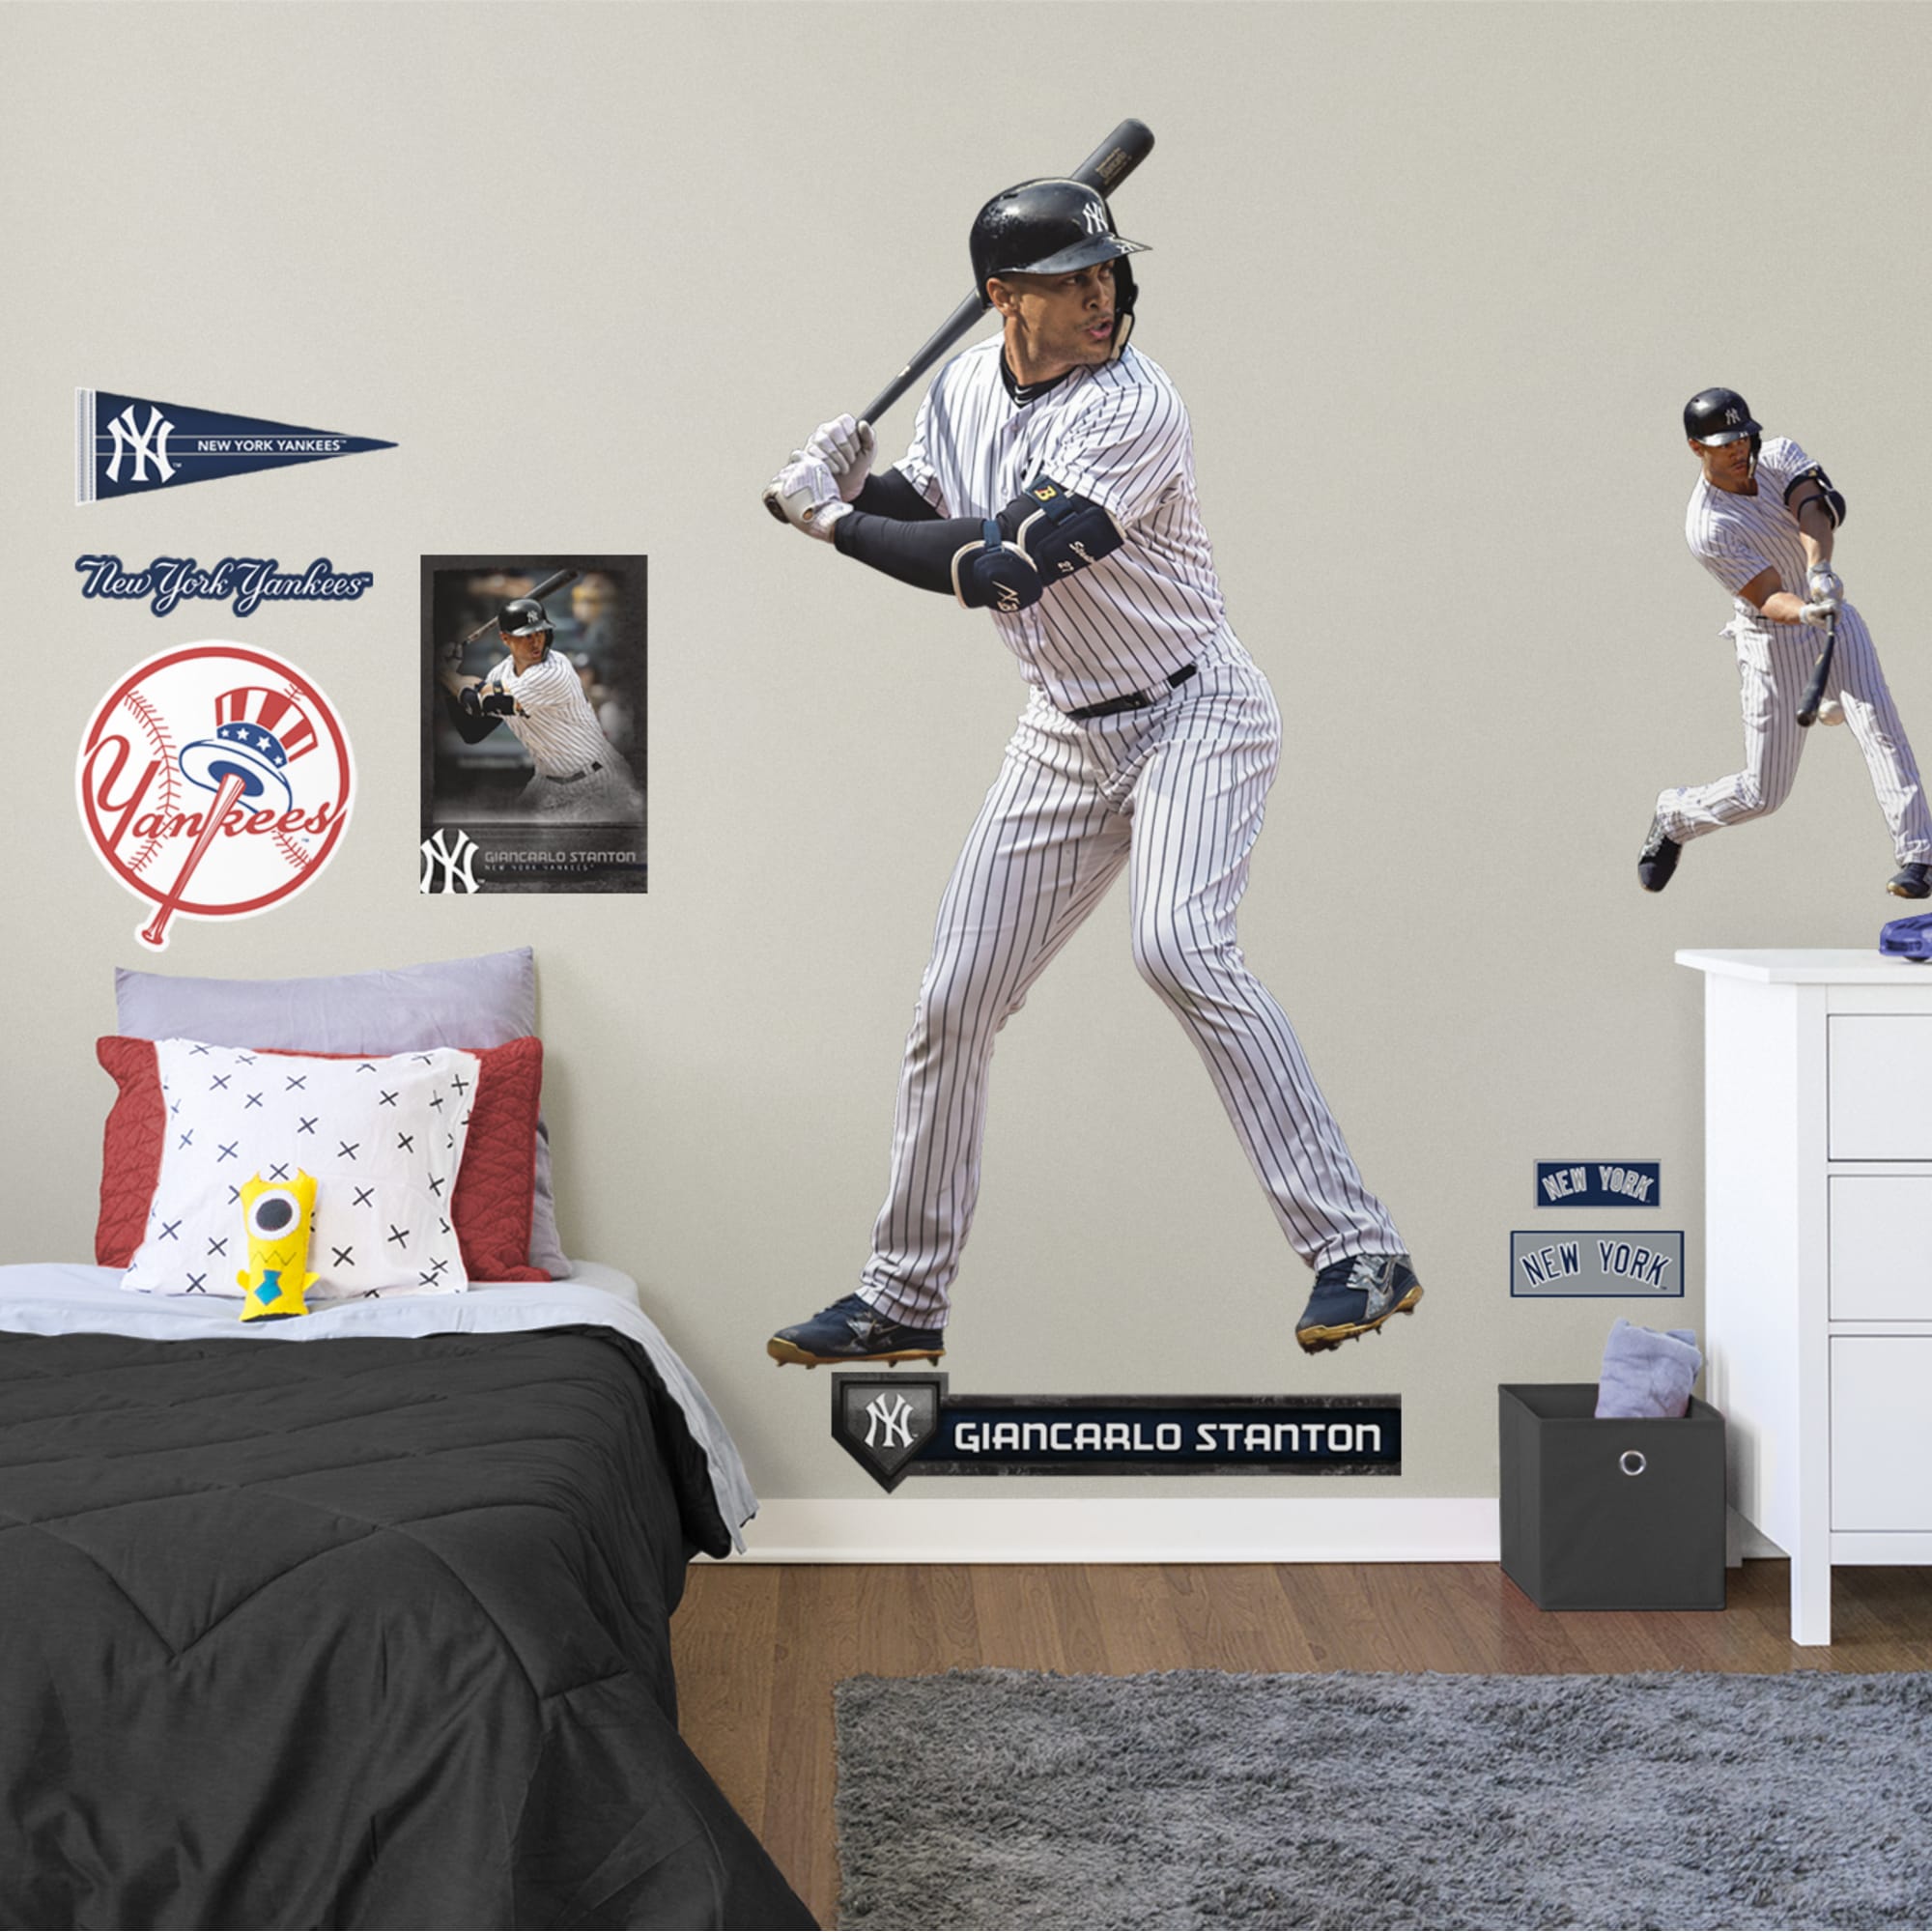 Giancarlo Stanton for New York Yankees - Officially Licensed MLB Removable Wall Decal XL by Fathead | Vinyl